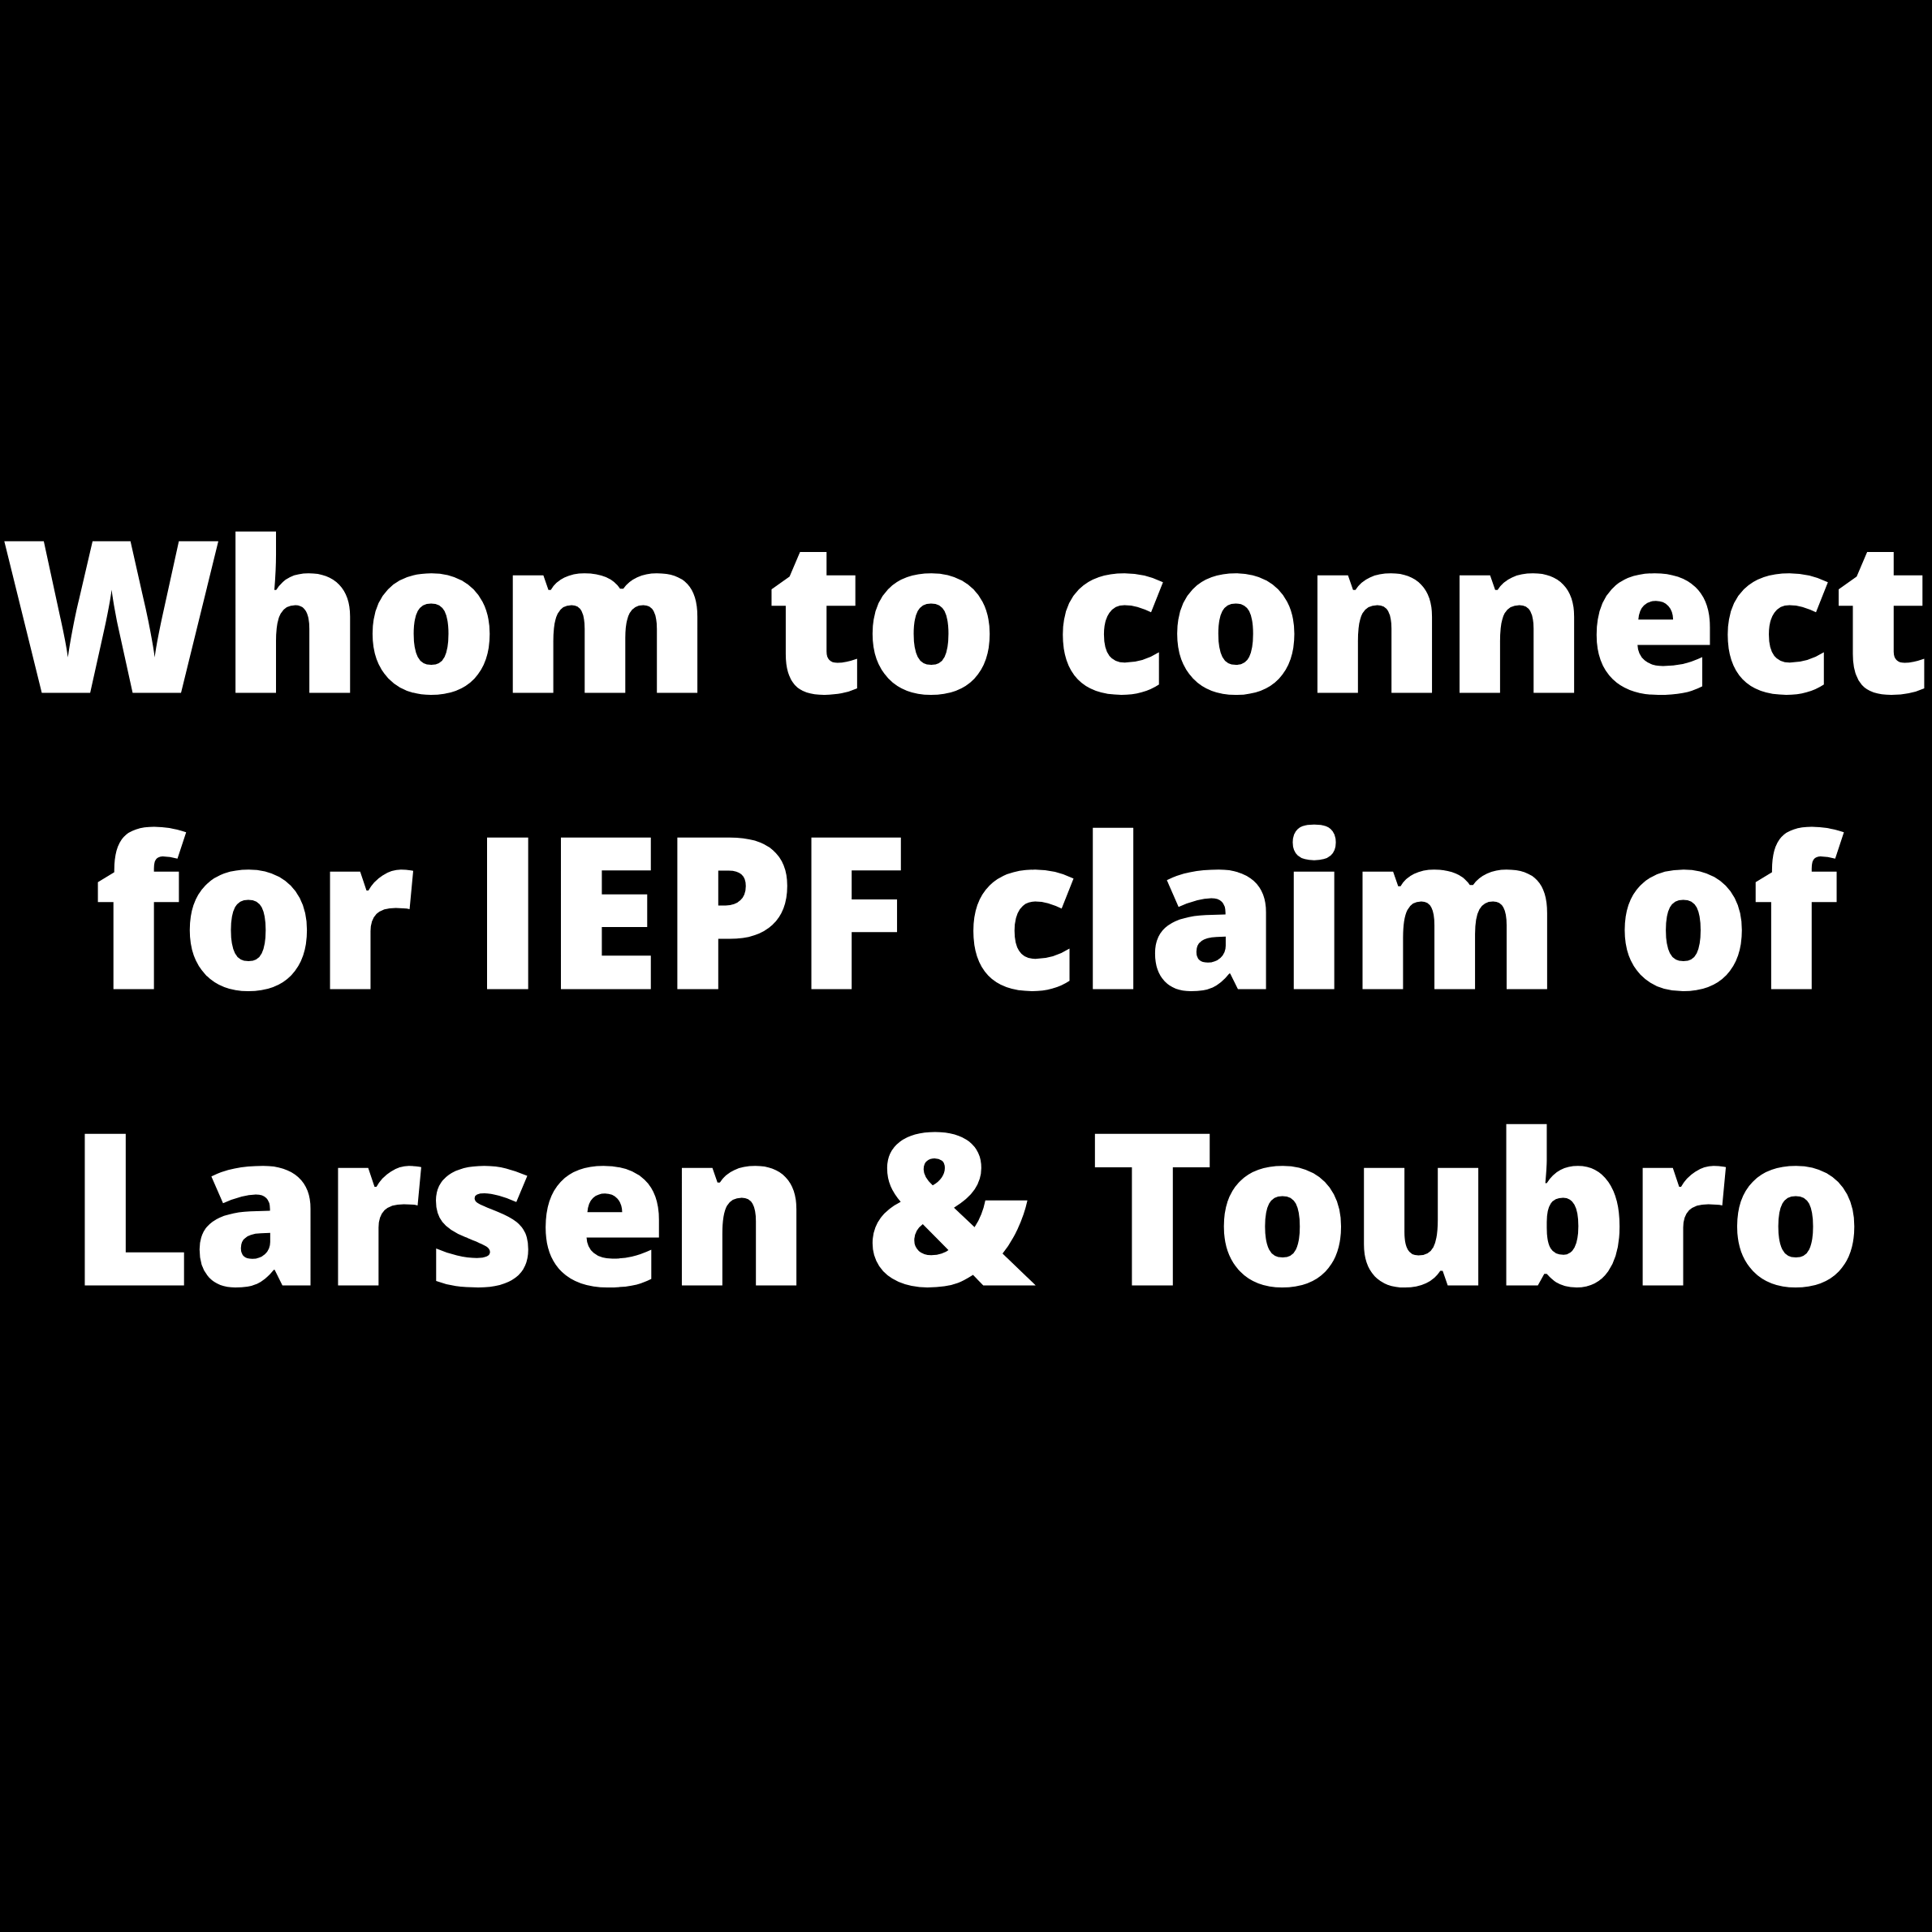 Whom to contact for  IEPF claim of LARSEN & TOUBRO (L&T) shares / unclaimed dividend of LARSEN & TOUBRO (L&T) shares?